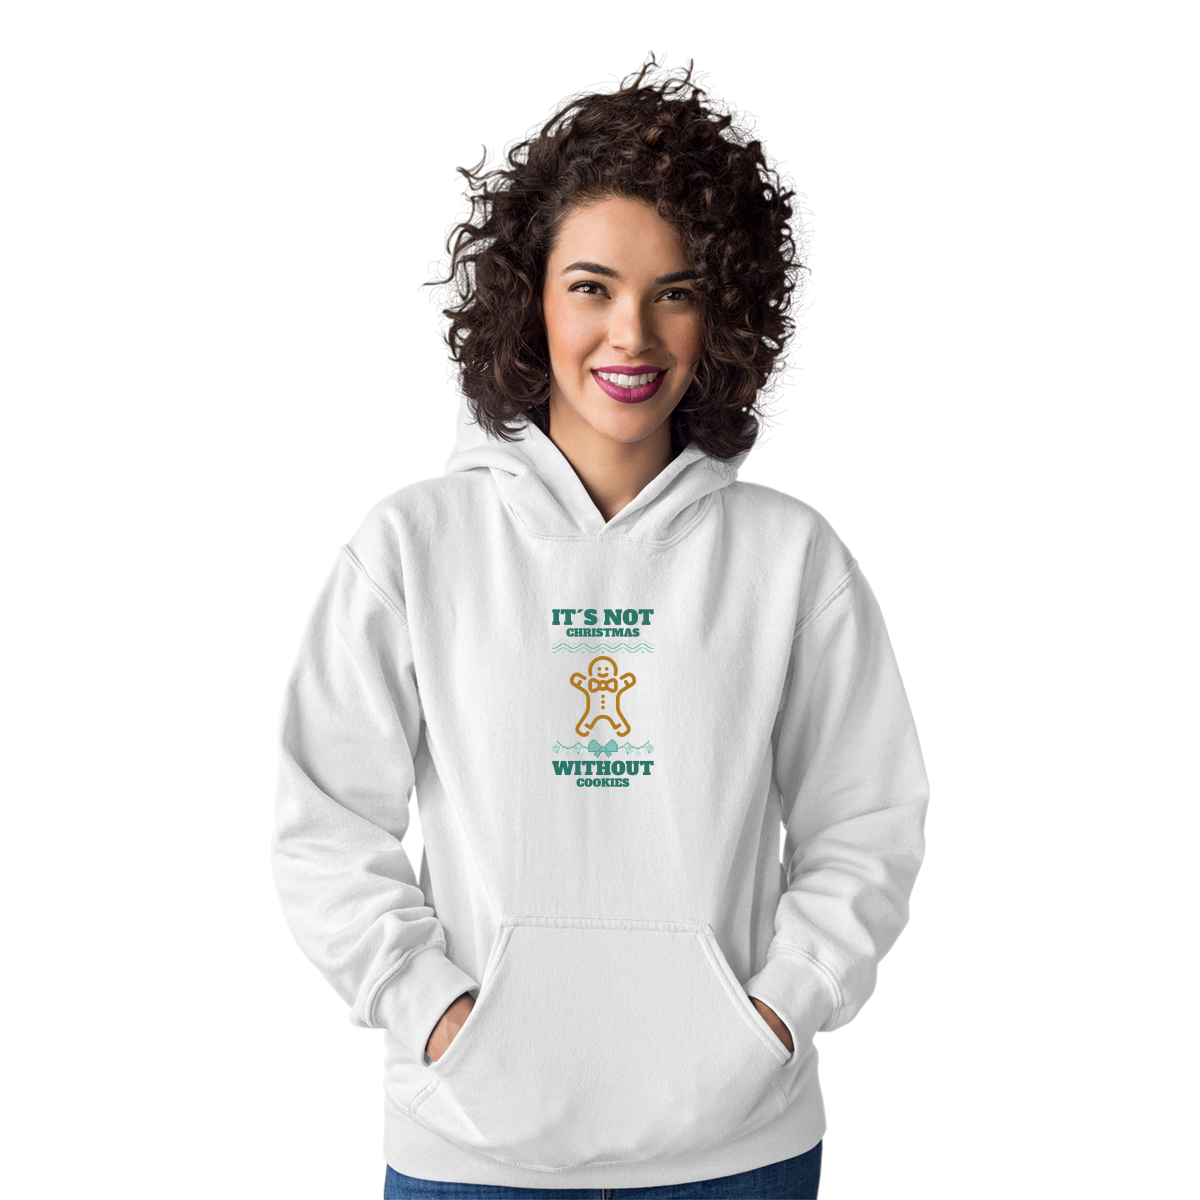 It's Not Christmas Without Cookies Unisex Hoodie | White